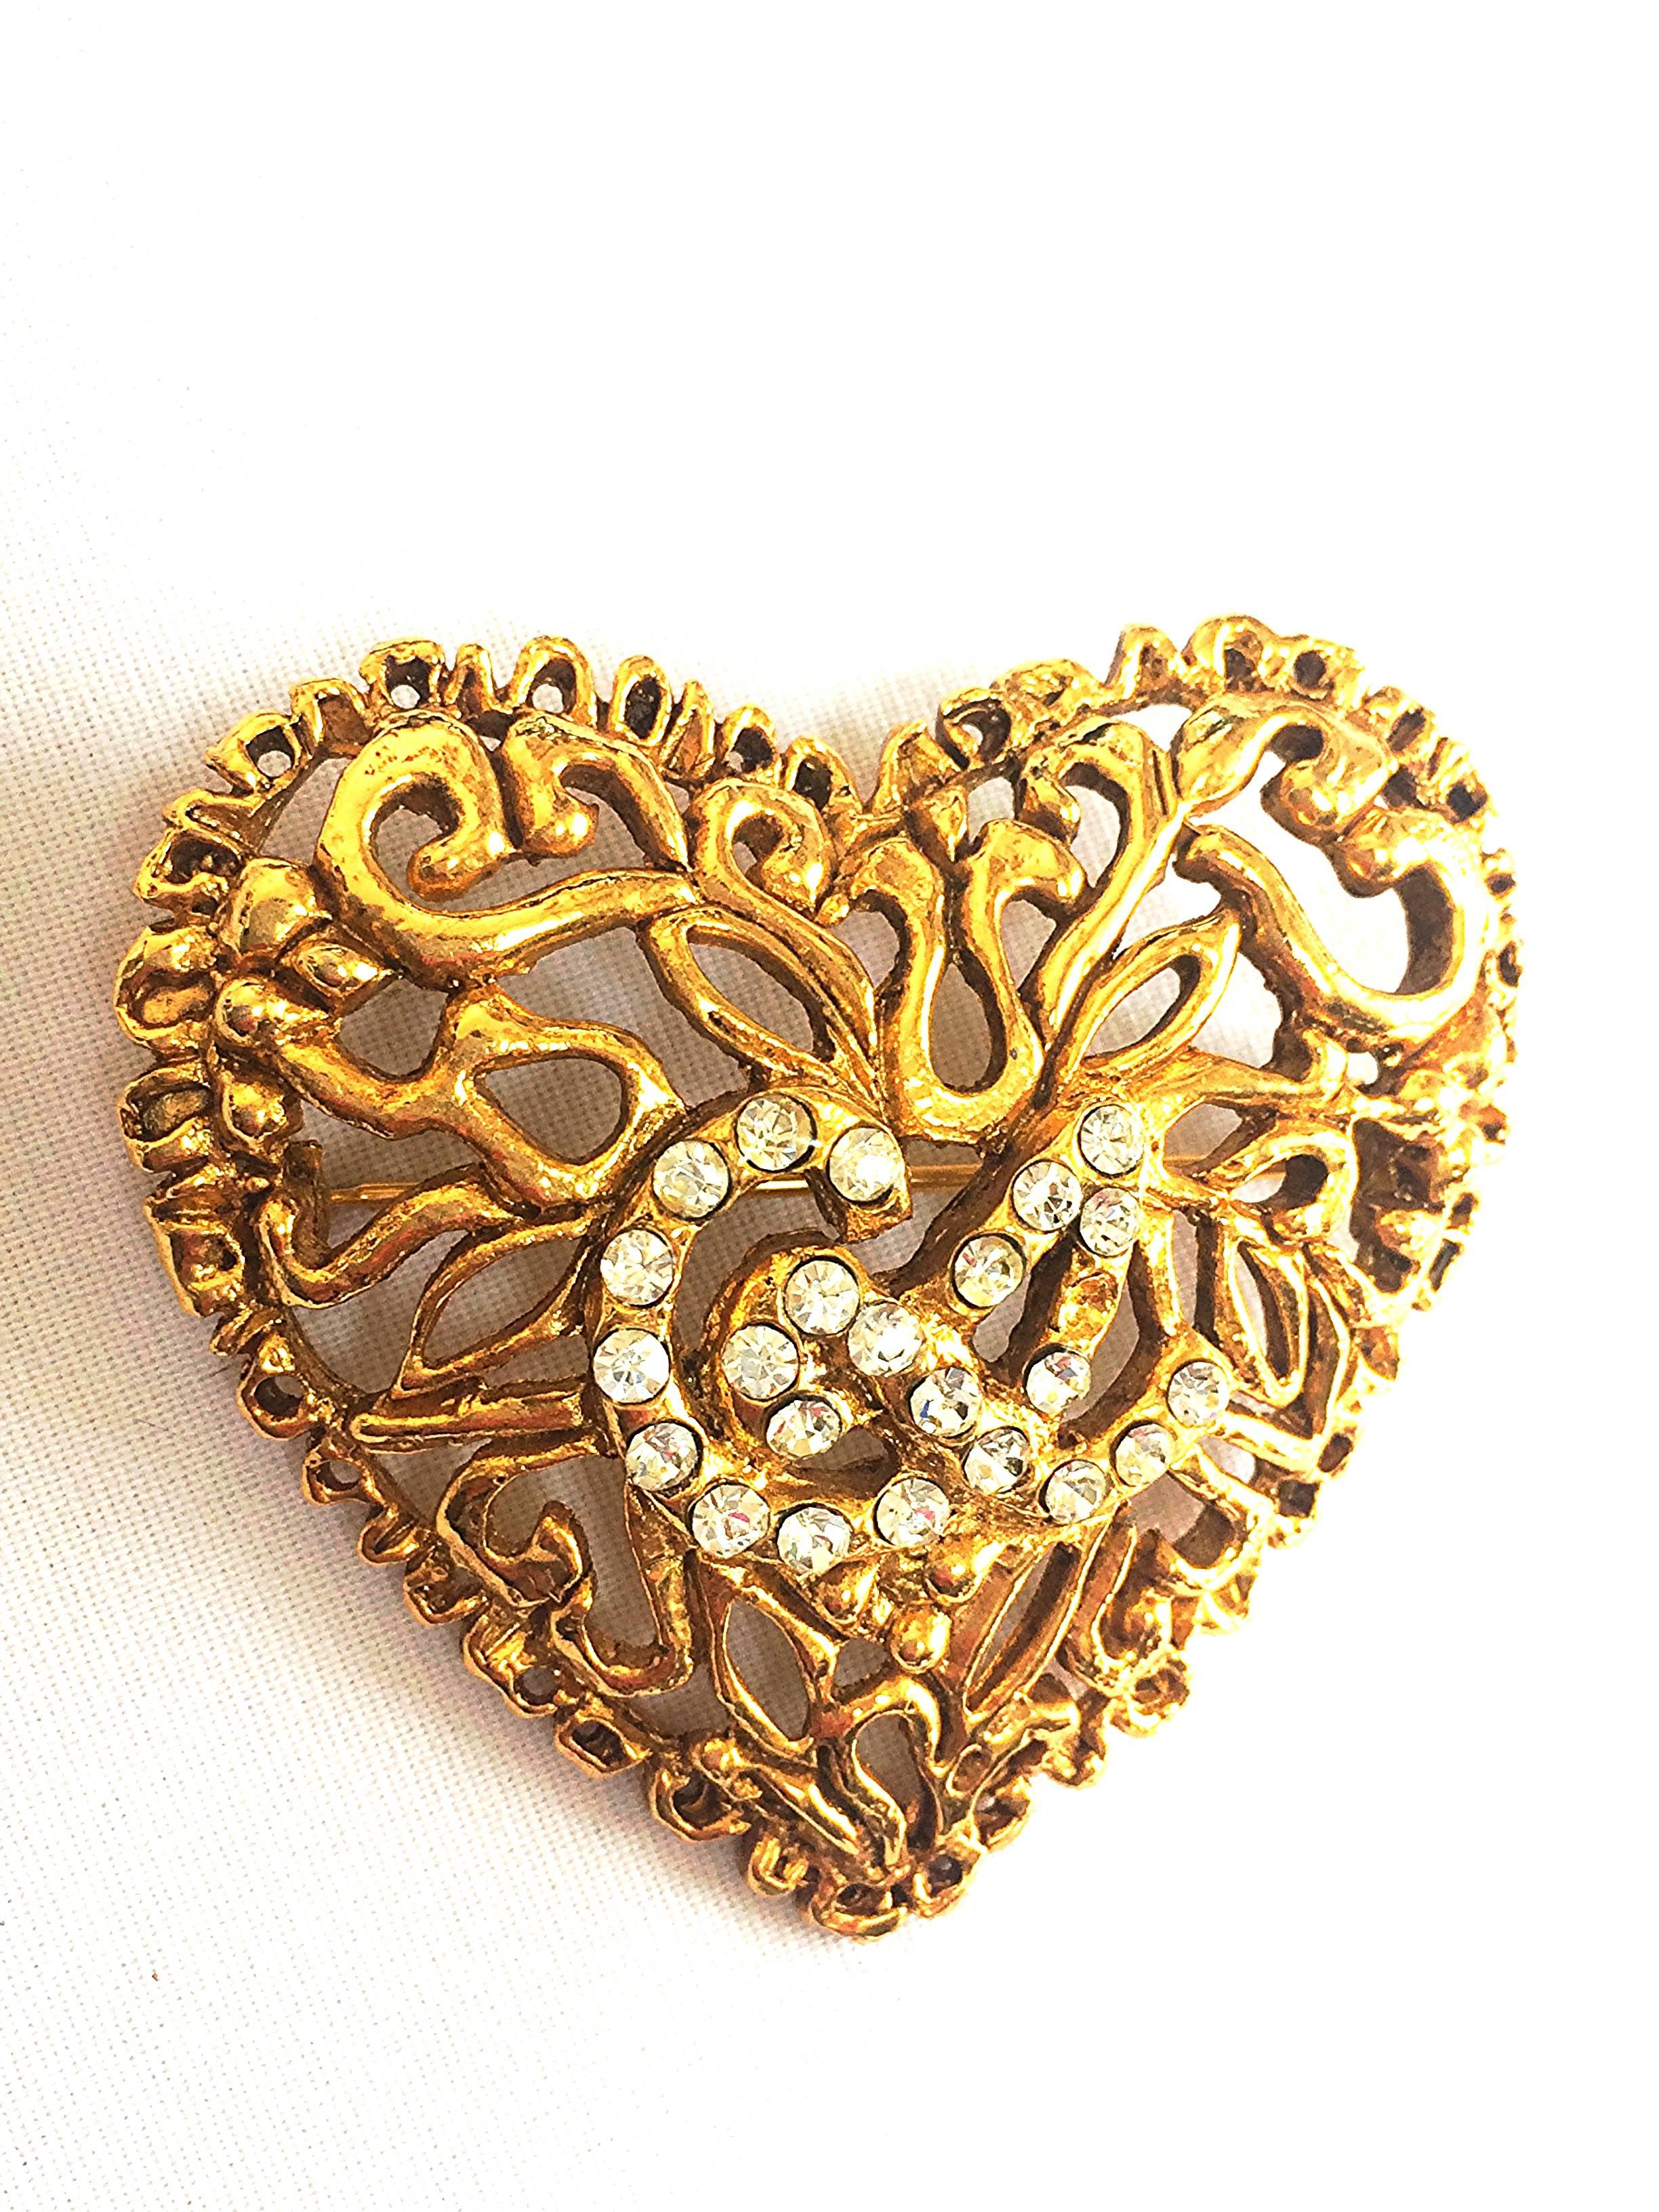 Vintage Christian Lacroix golden edwardian heart and arabesque design brooch In Good Condition For Sale In Kashiwa, Chiba